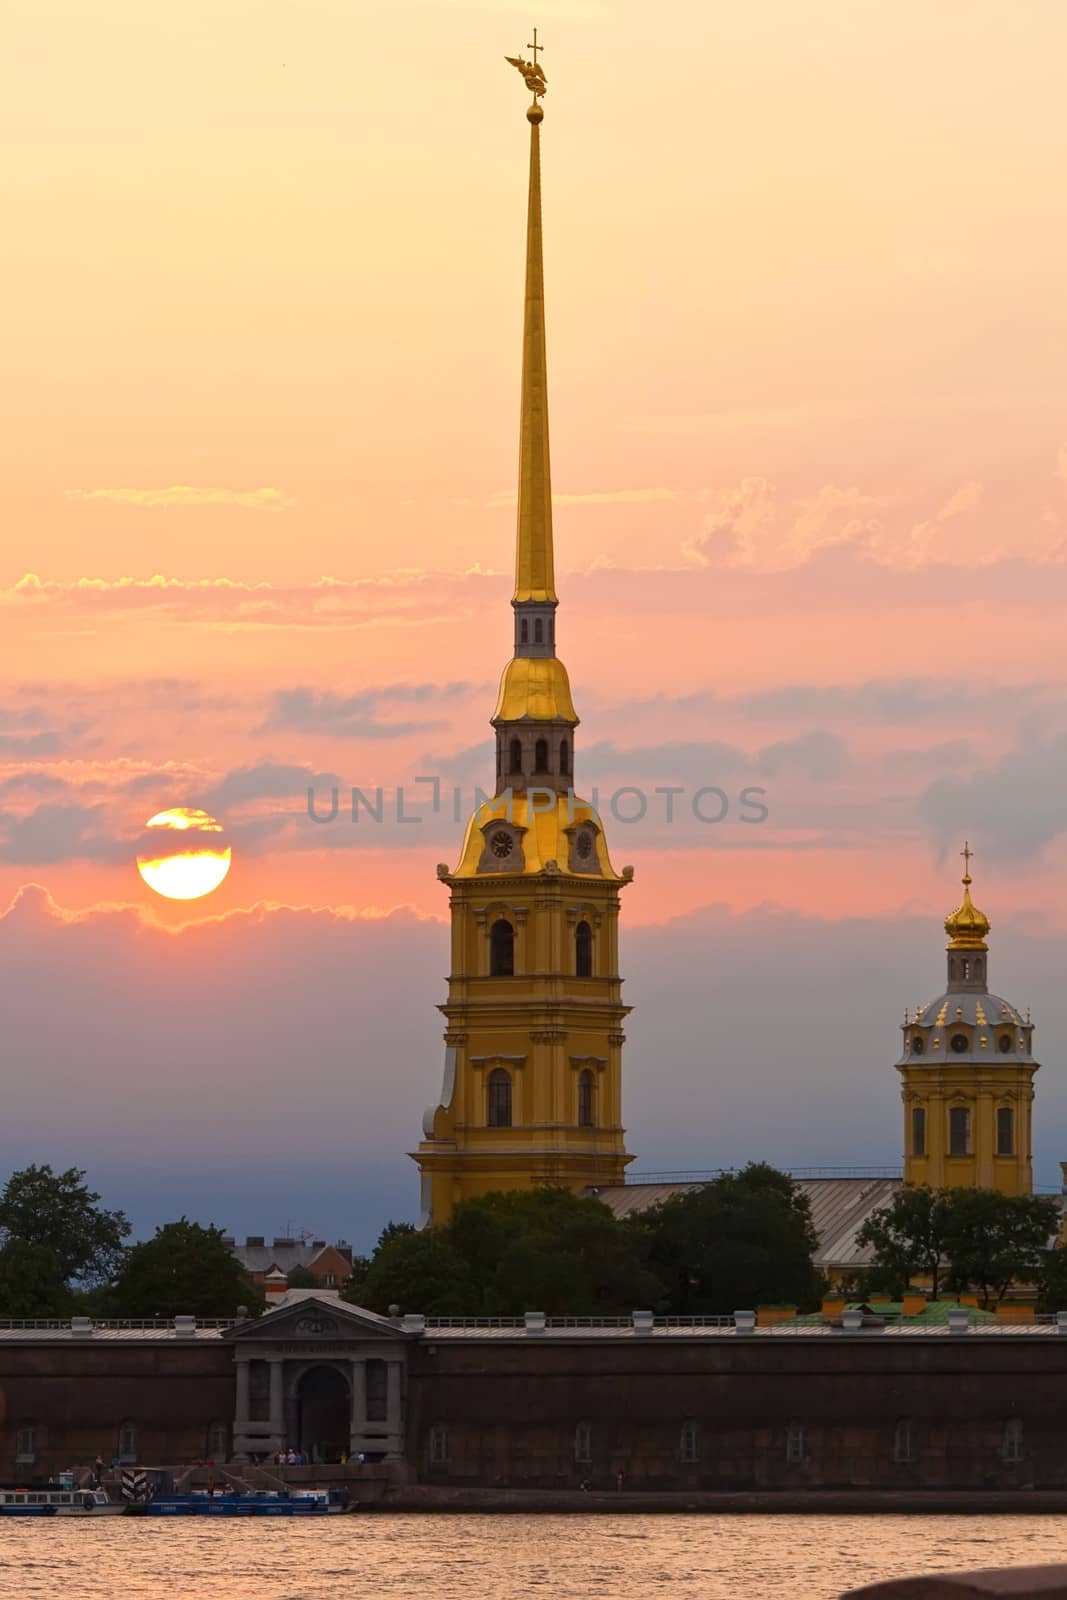 Peter and Paul fortress in Saint Petersburg, Russia